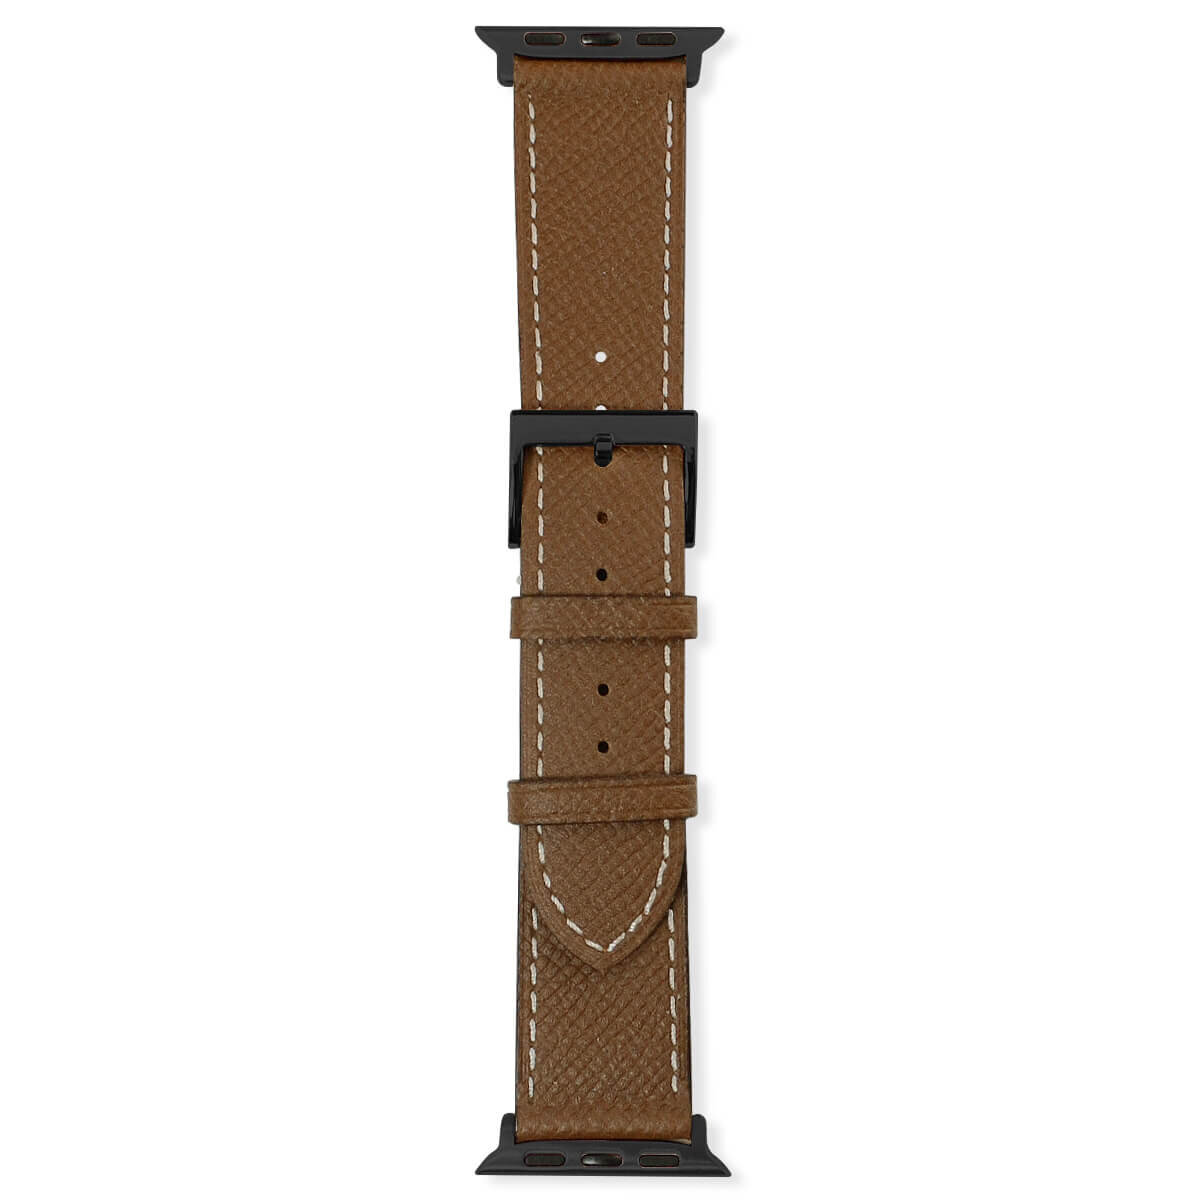 42mm/44mm/45mm/49mm Apple Watch Strap, Calf Leather Band (Coffee)